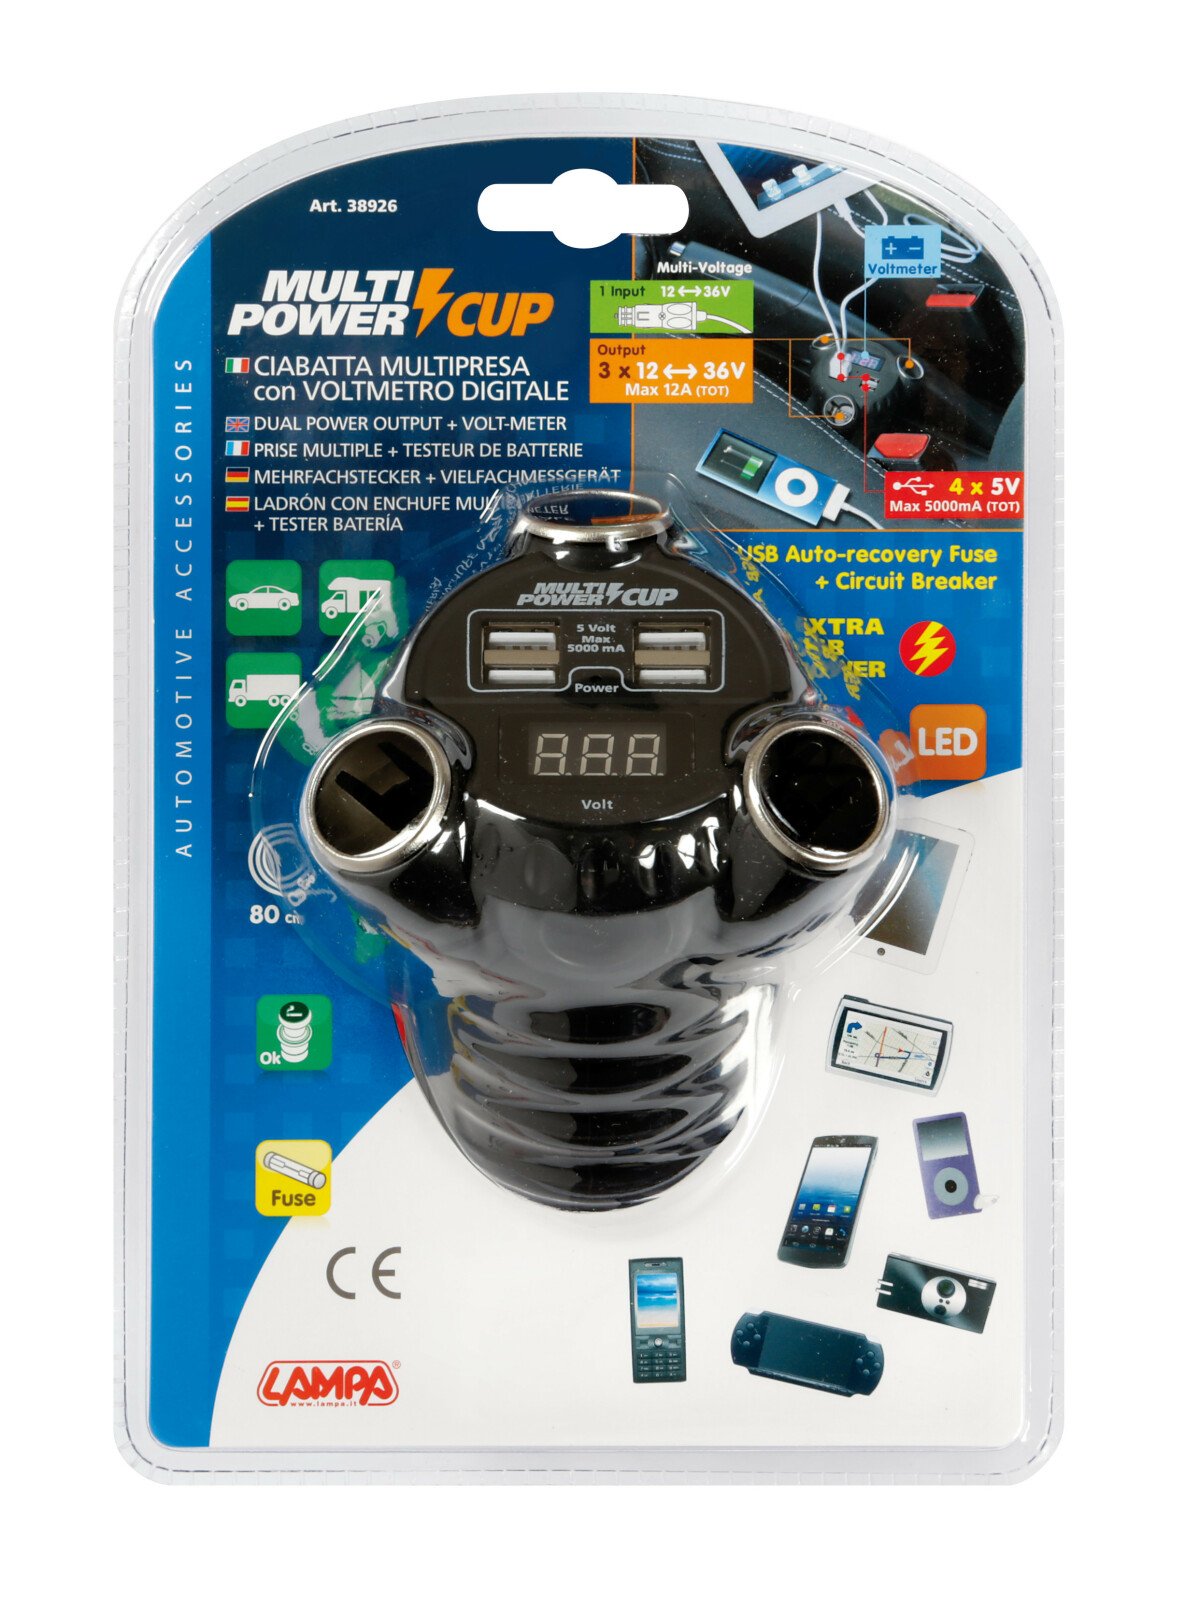 Multi-Power Cup, 3 sockets + 4 USB and voltmeter, 12/24/36V thumb